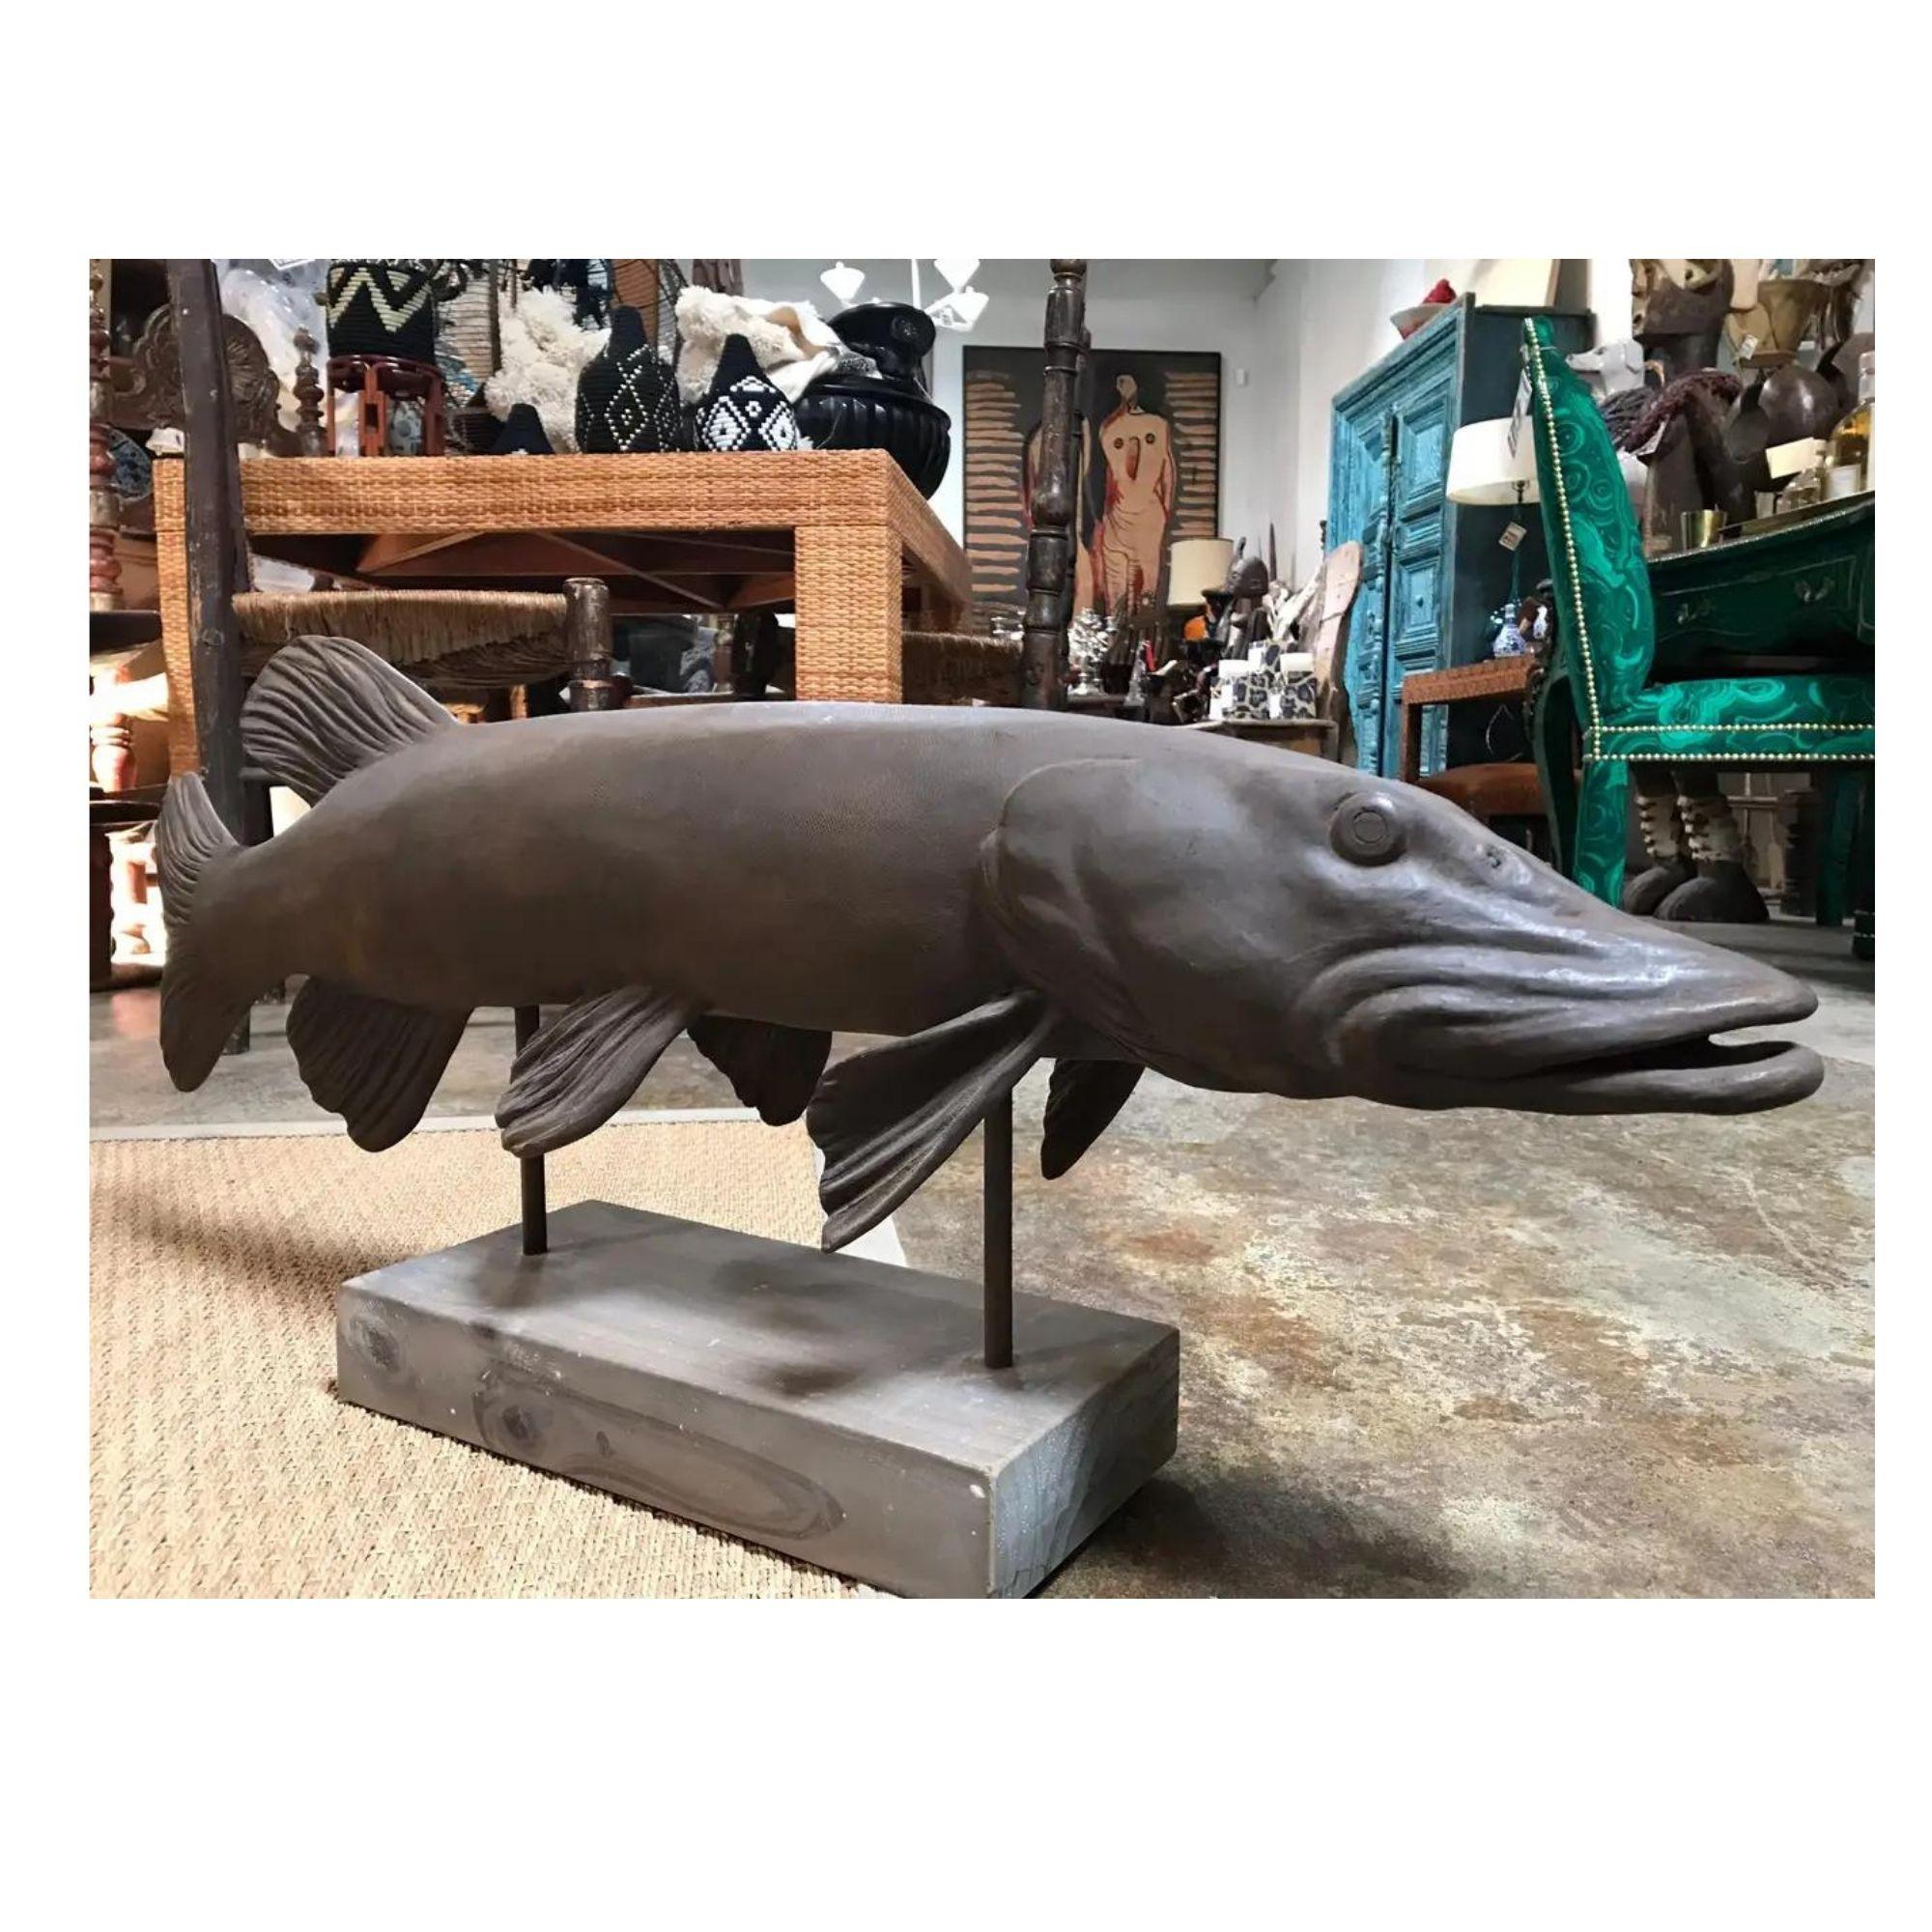 This pike fish sculpture is cast in a light, textured, brown patinated metal and is mounted on a matching grey wood. The details on the fins, face and even the scales are quite distinct and defined.